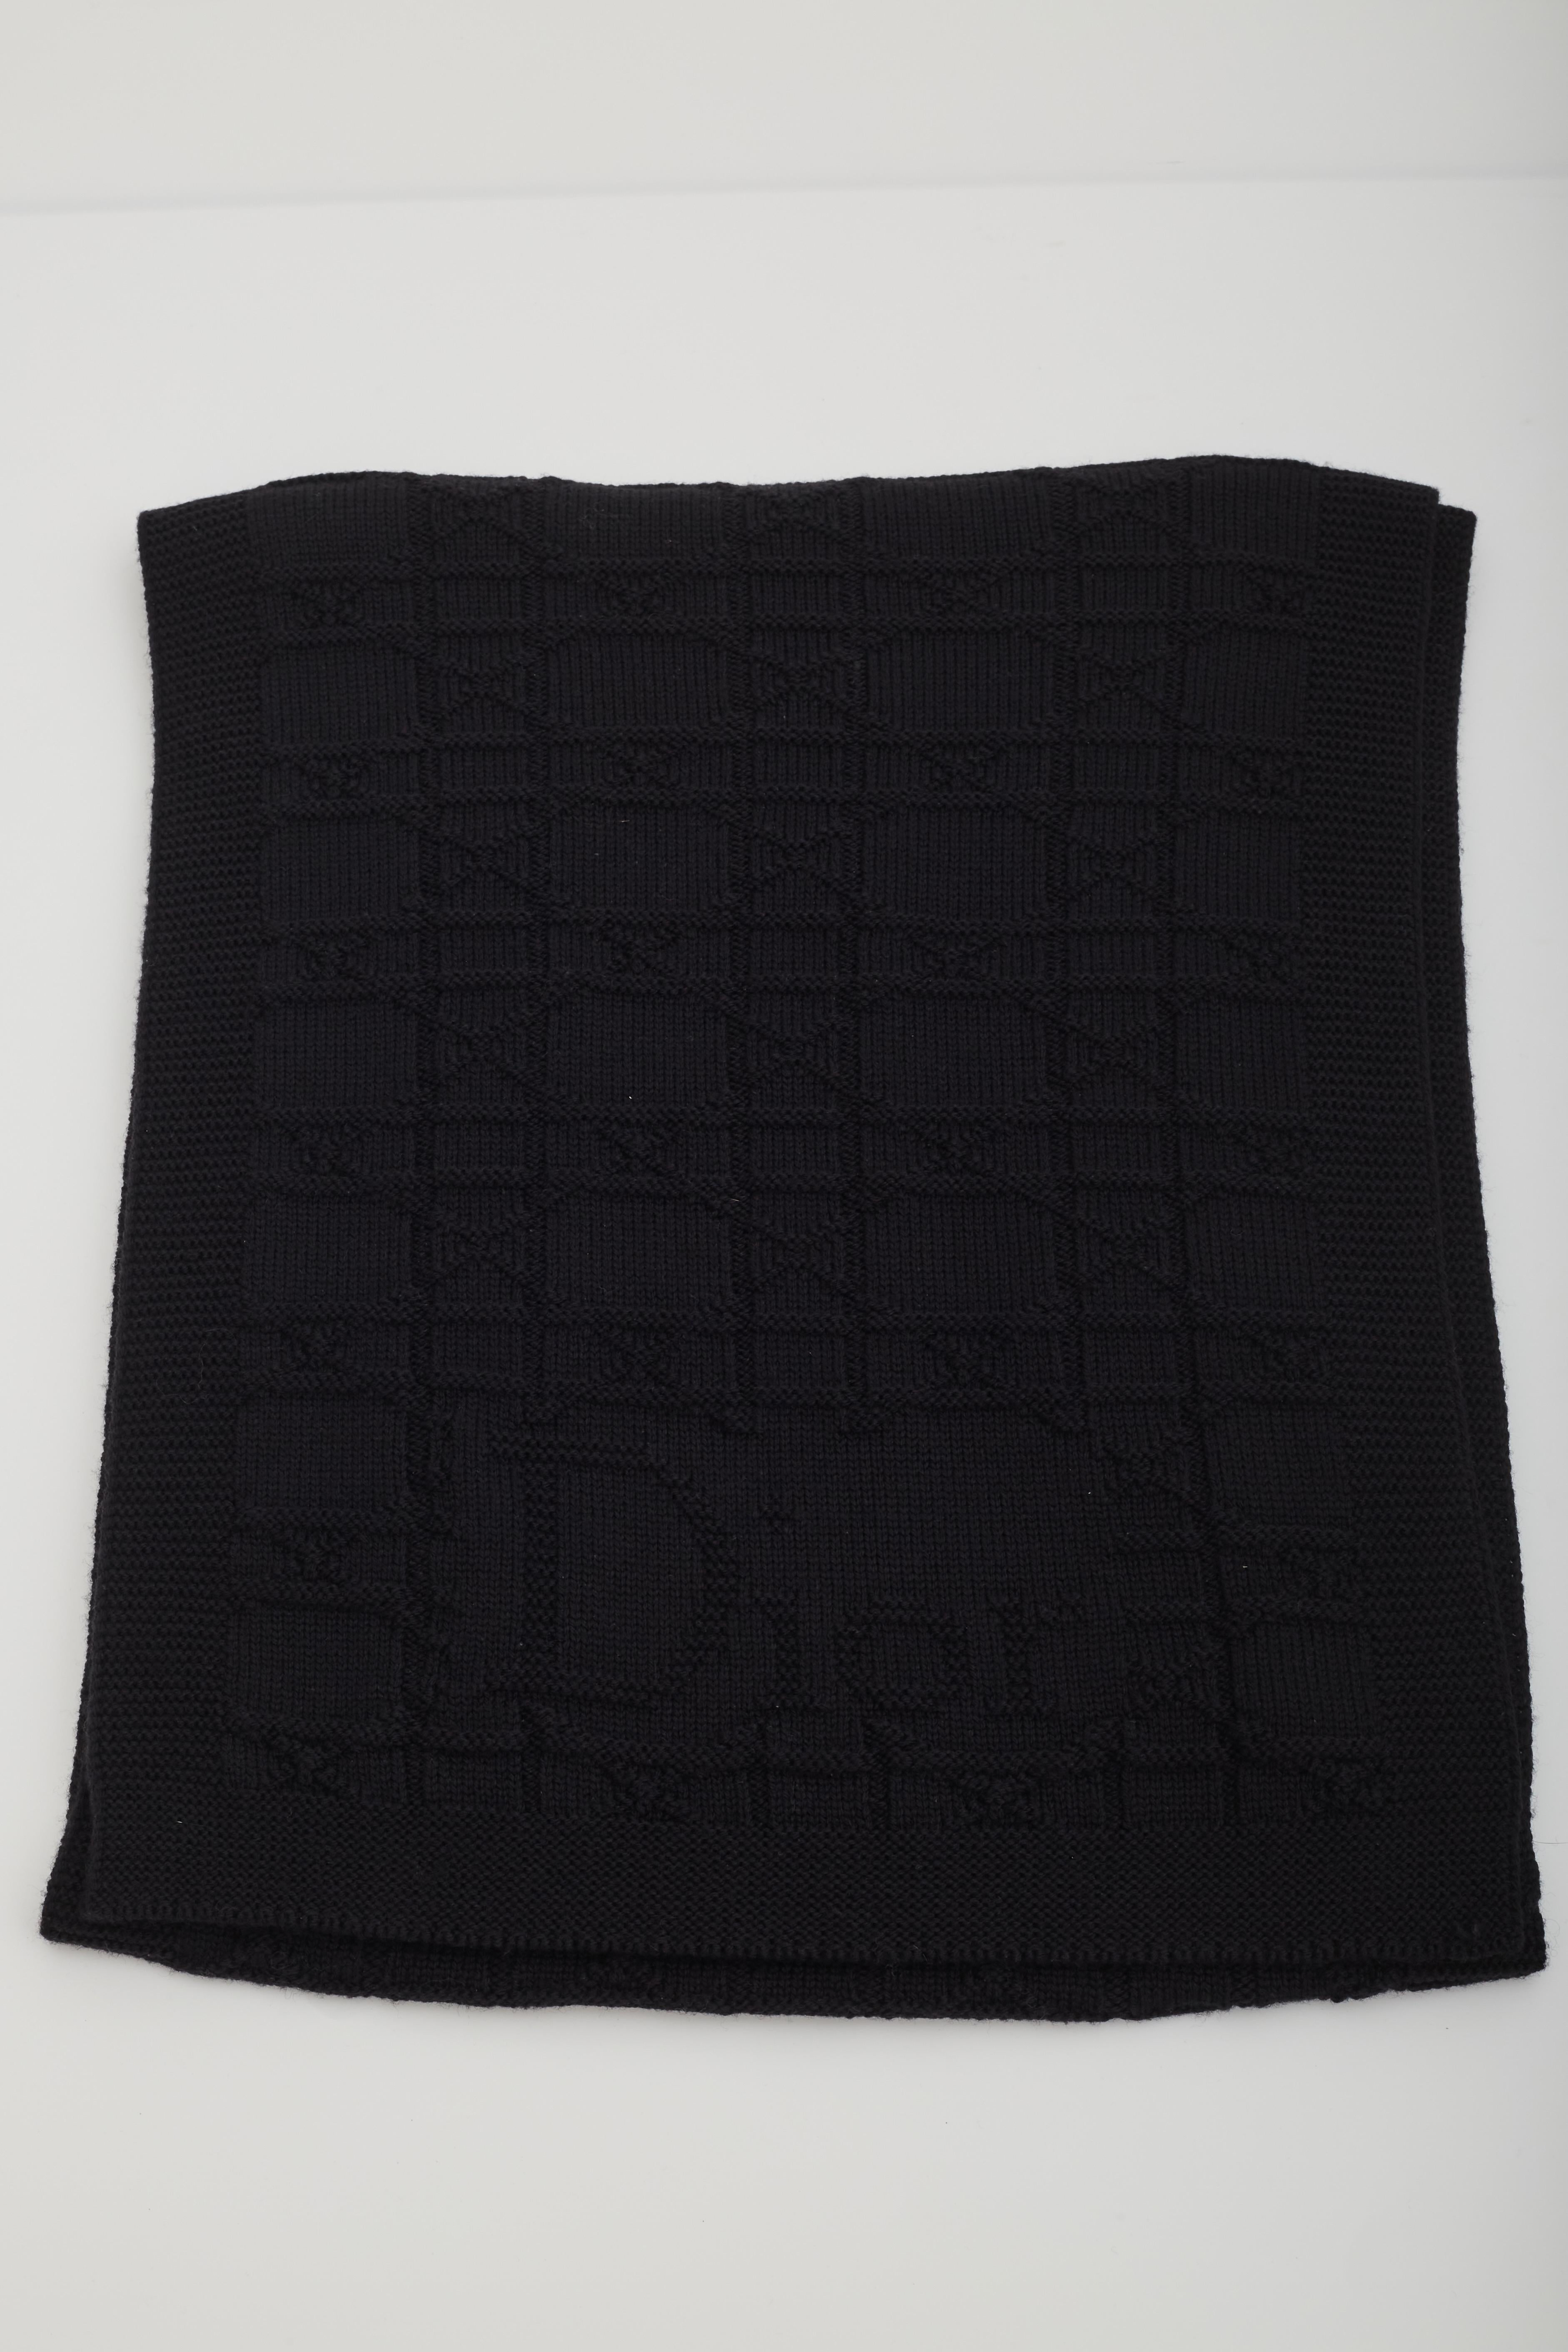 Dior Vintage Cannage Black Wool Scarf (Like New) In Excellent Condition For Sale In Montreal, Quebec